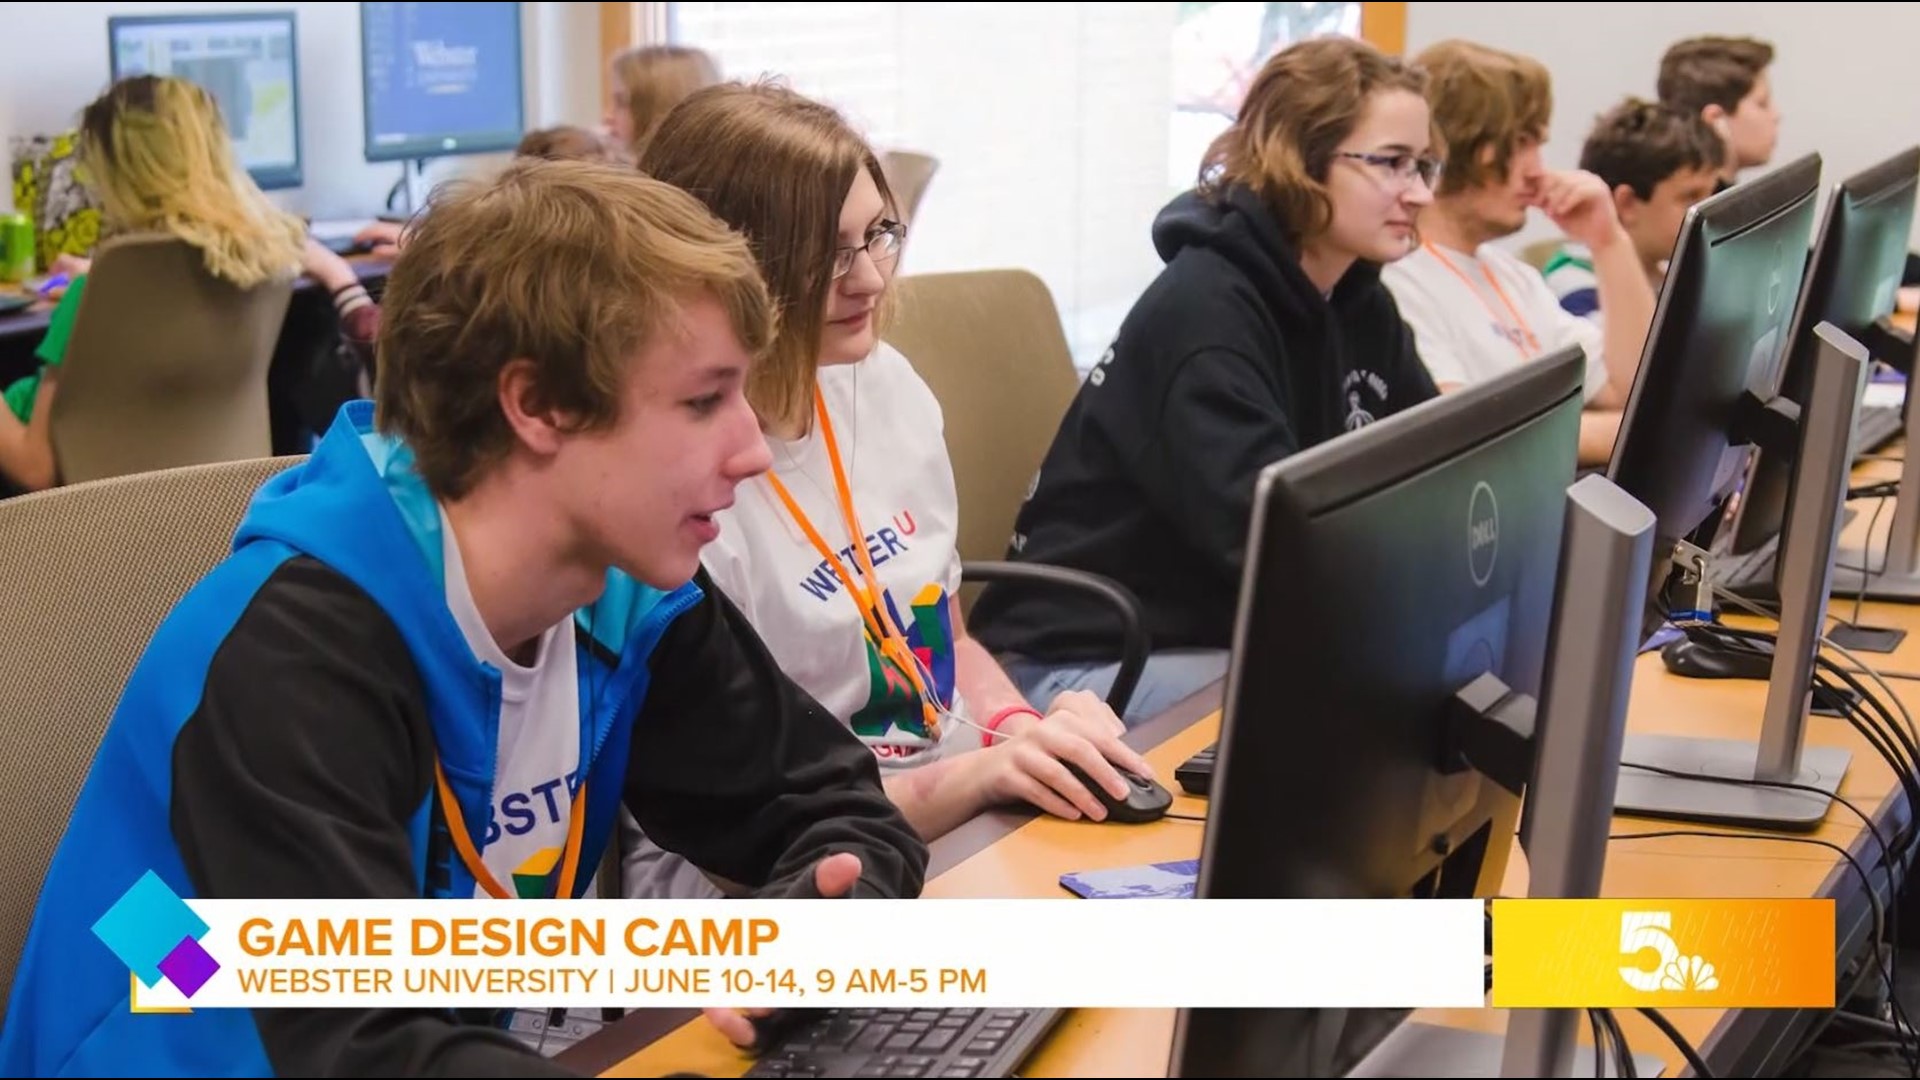 14 to 18-year-old campers can learn the basics of scriptwriting, animation, film production, and game design from working professionals.